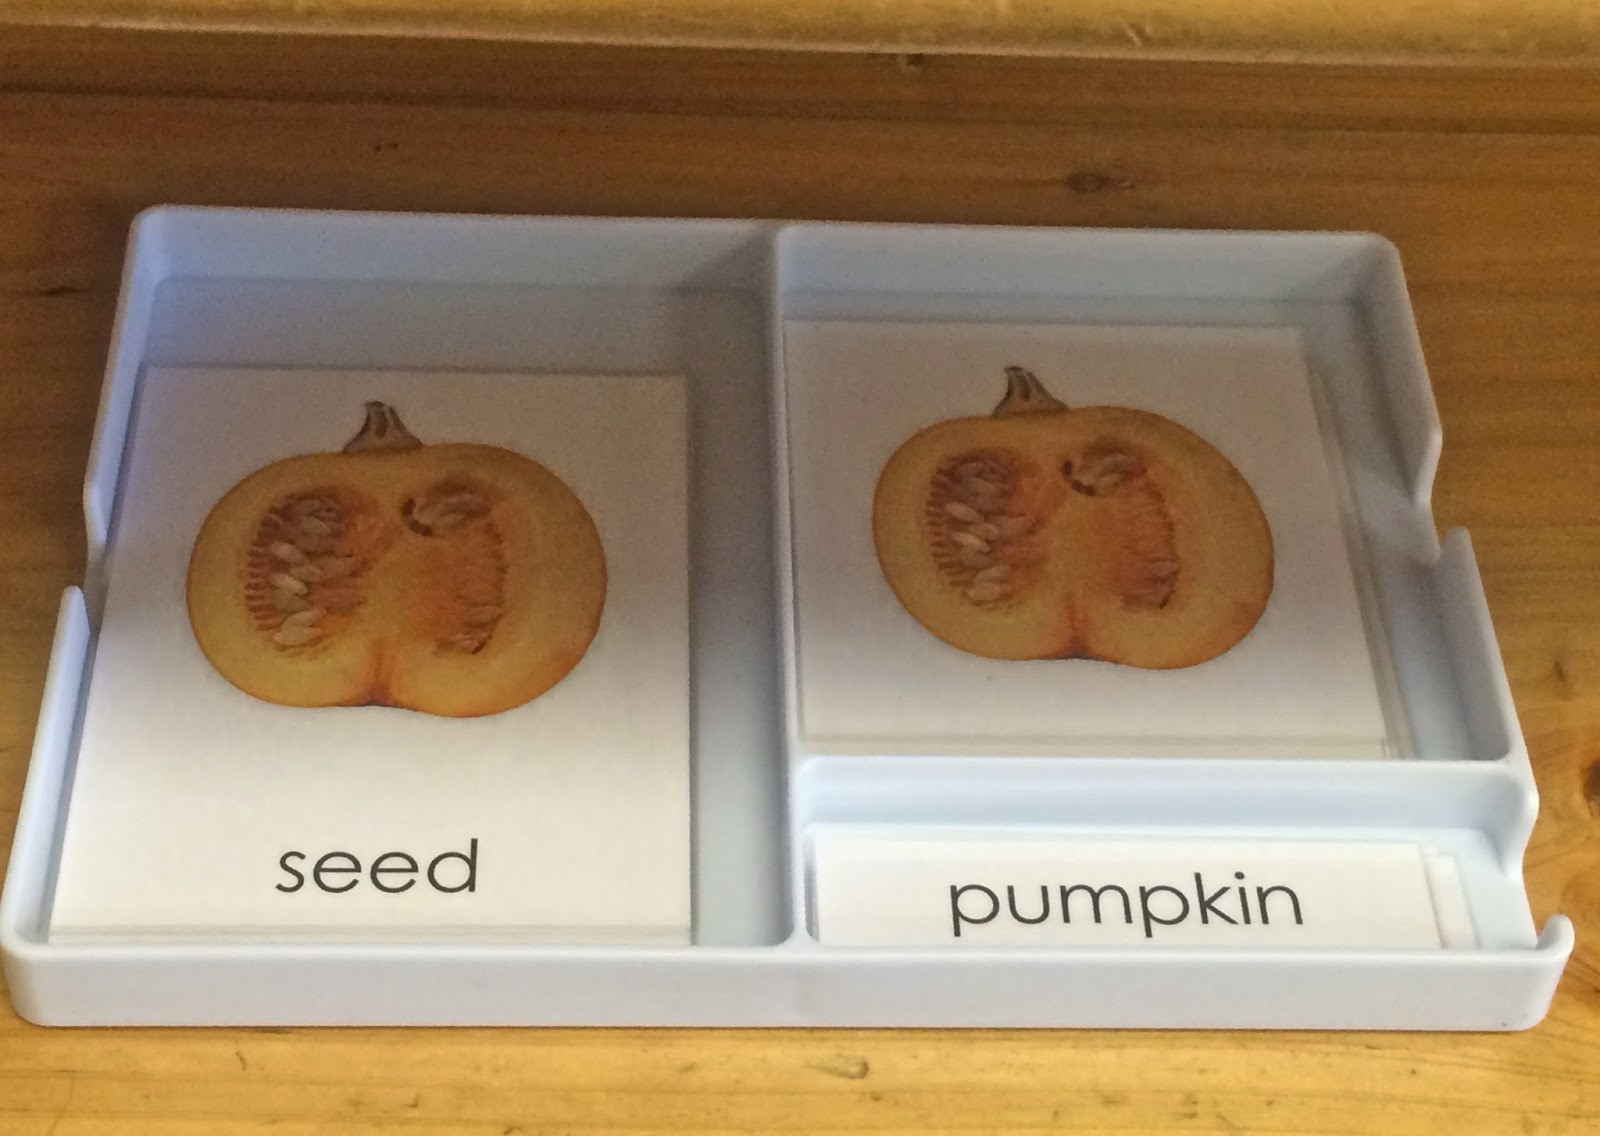 The Helpful Garden: Three-part Card Trays From Montessori Research